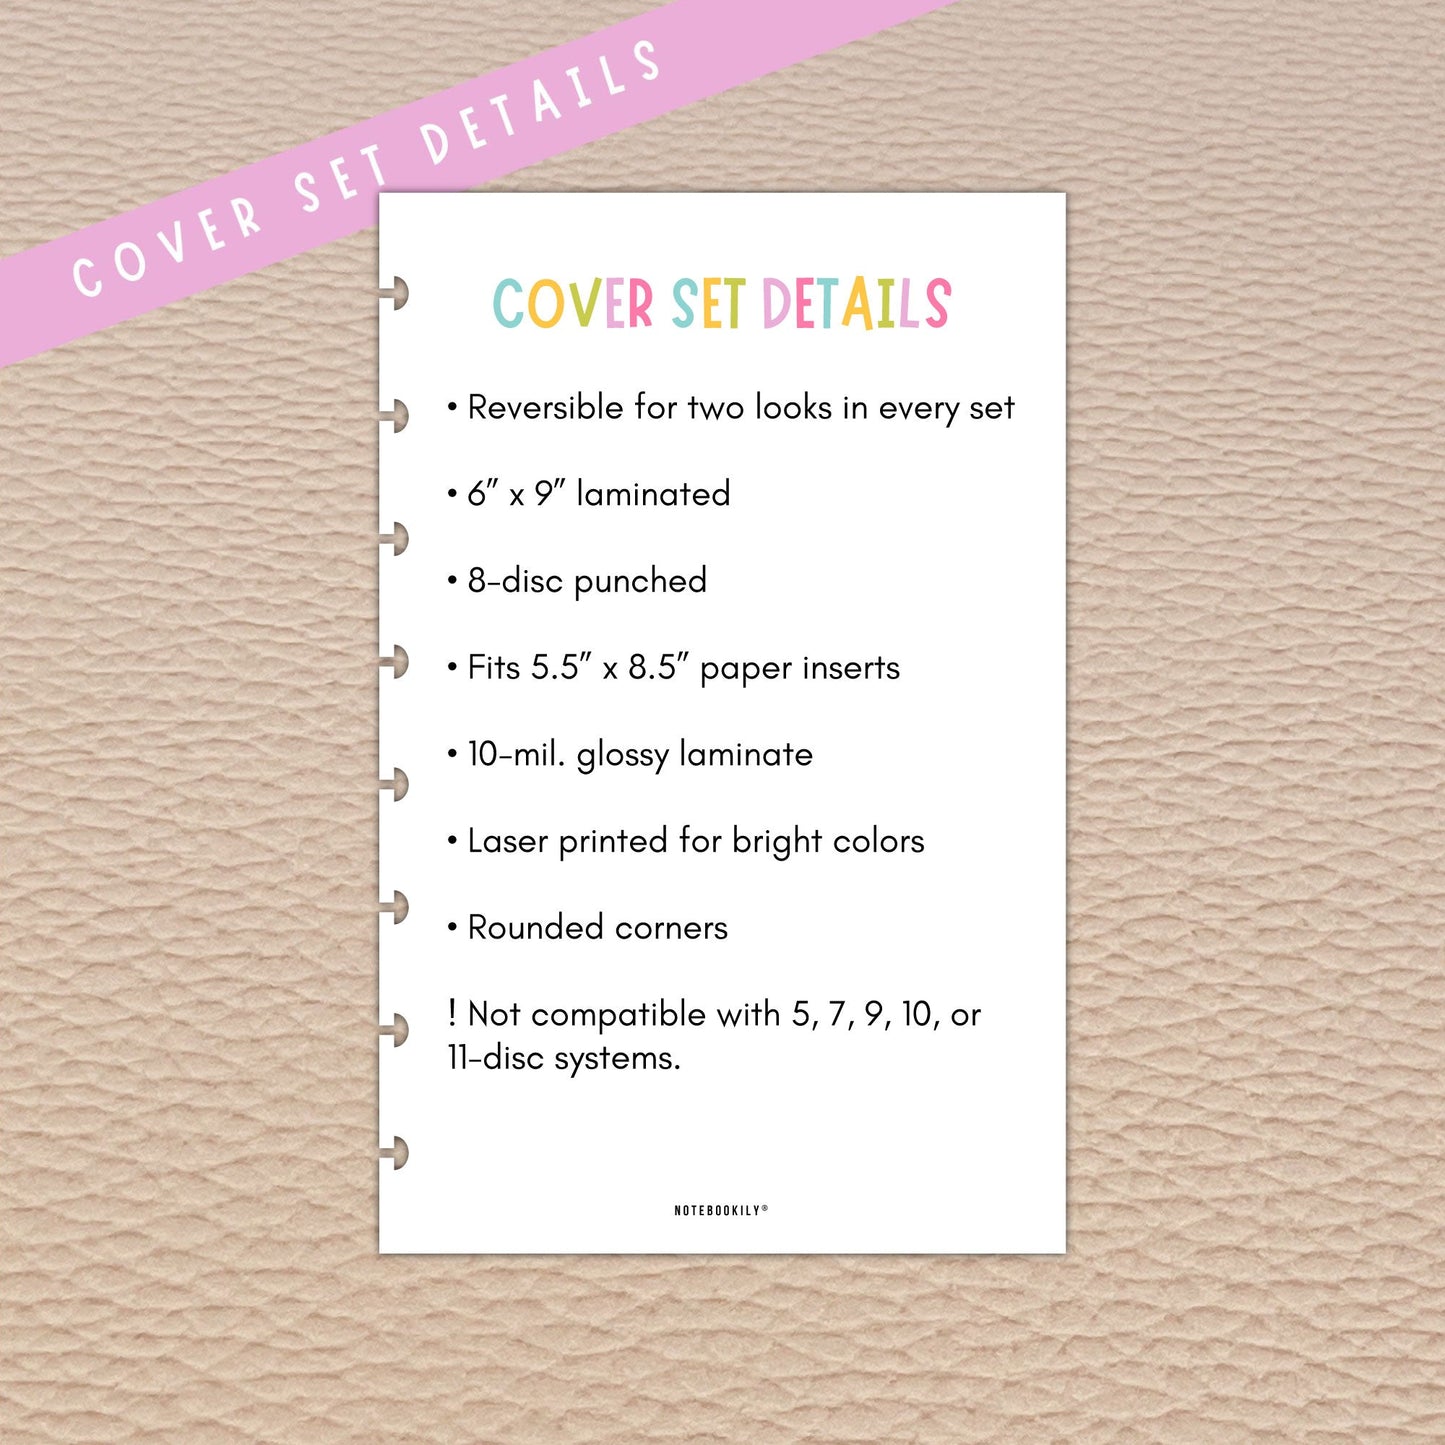 Notebookily Discbound Notebook Cover Set Details